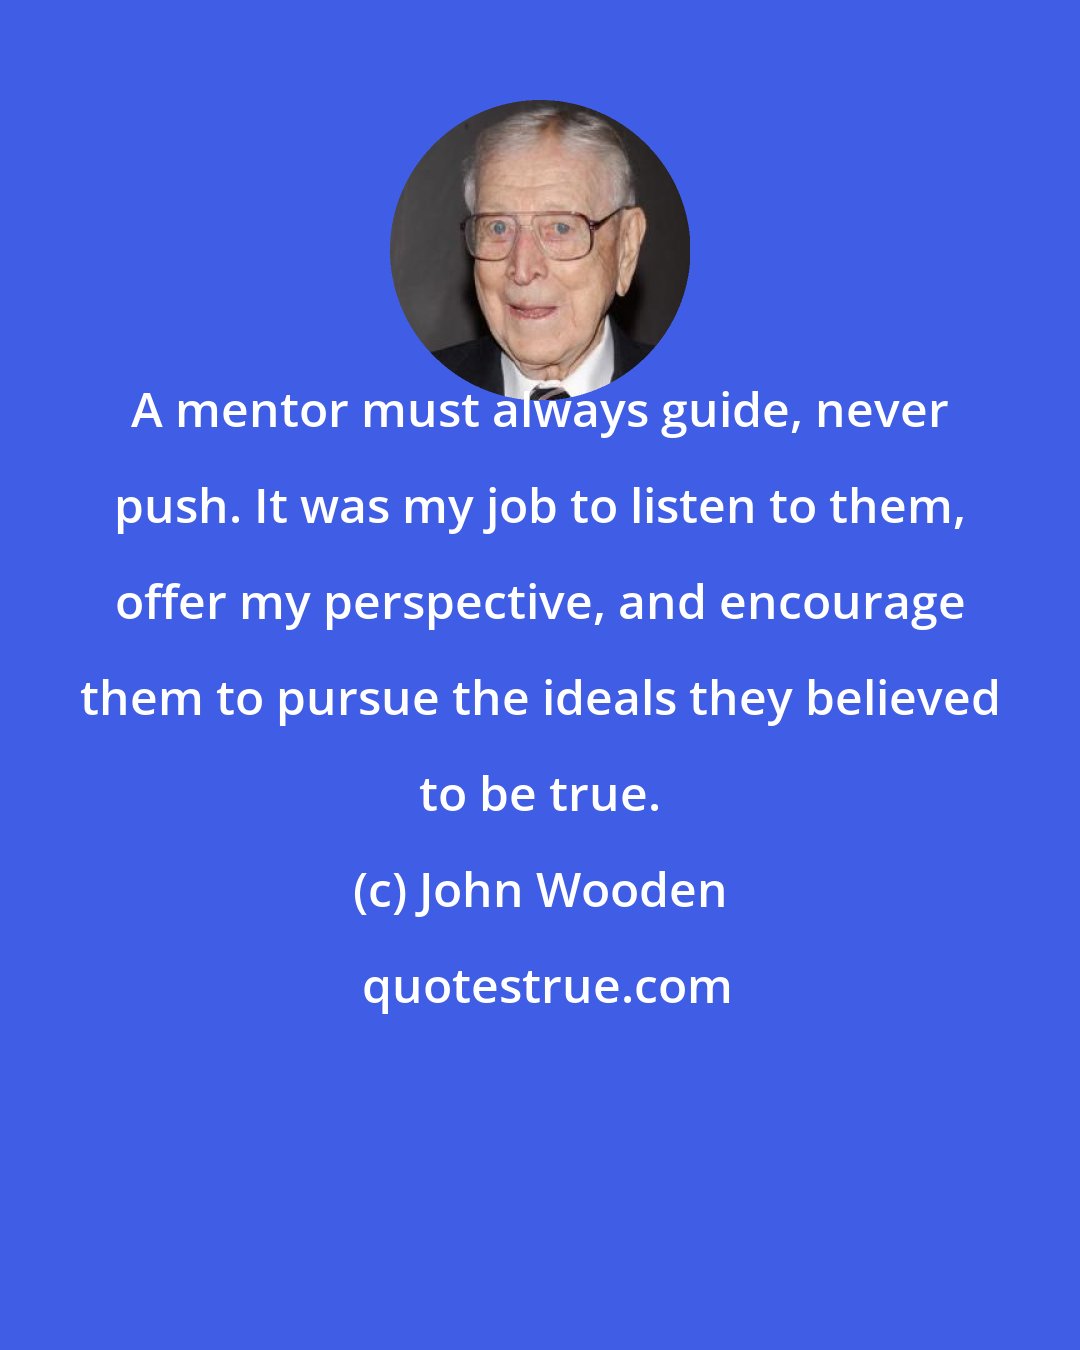 John Wooden: A mentor must always guide, never push. It was my job to listen to them, offer my perspective, and encourage them to pursue the ideals they believed to be true.